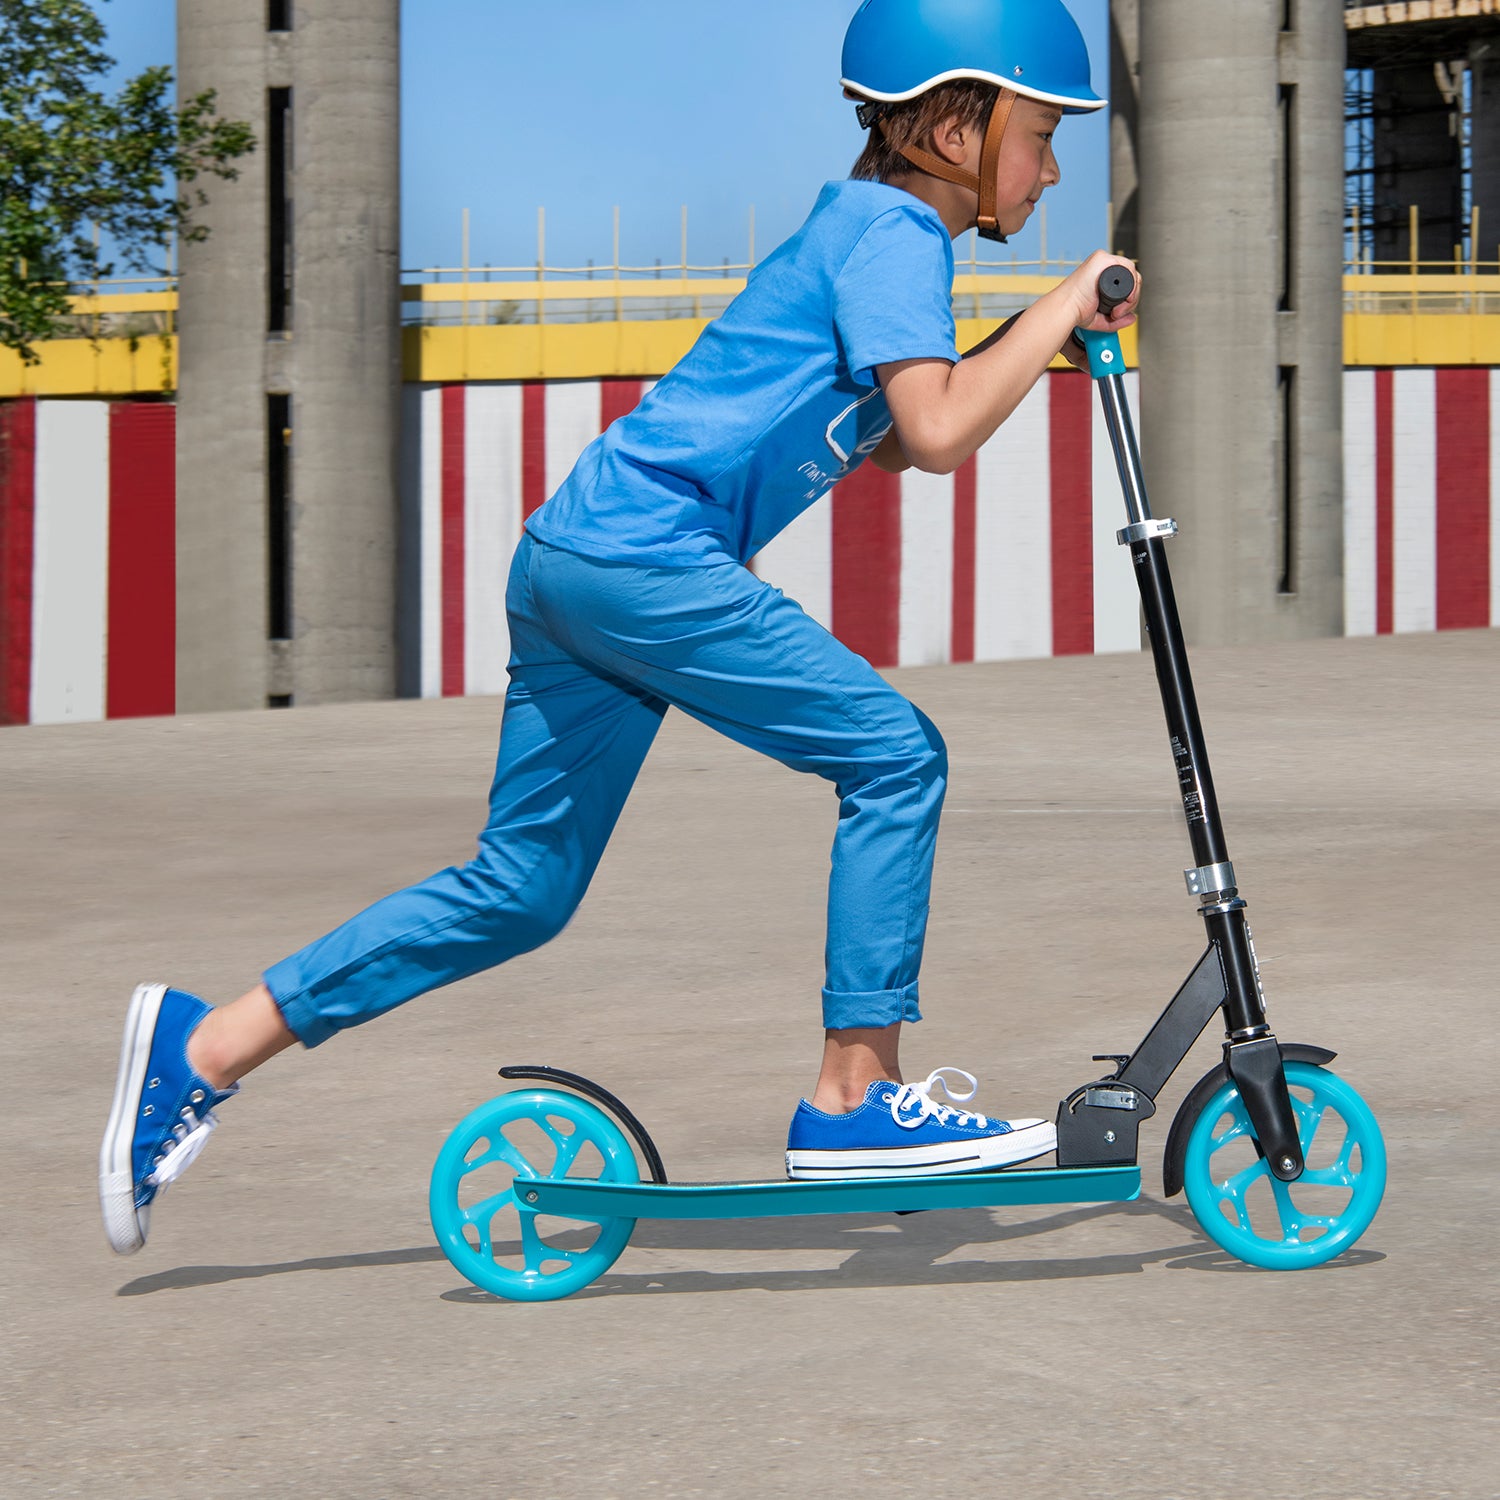 kid riding blue hex scooter